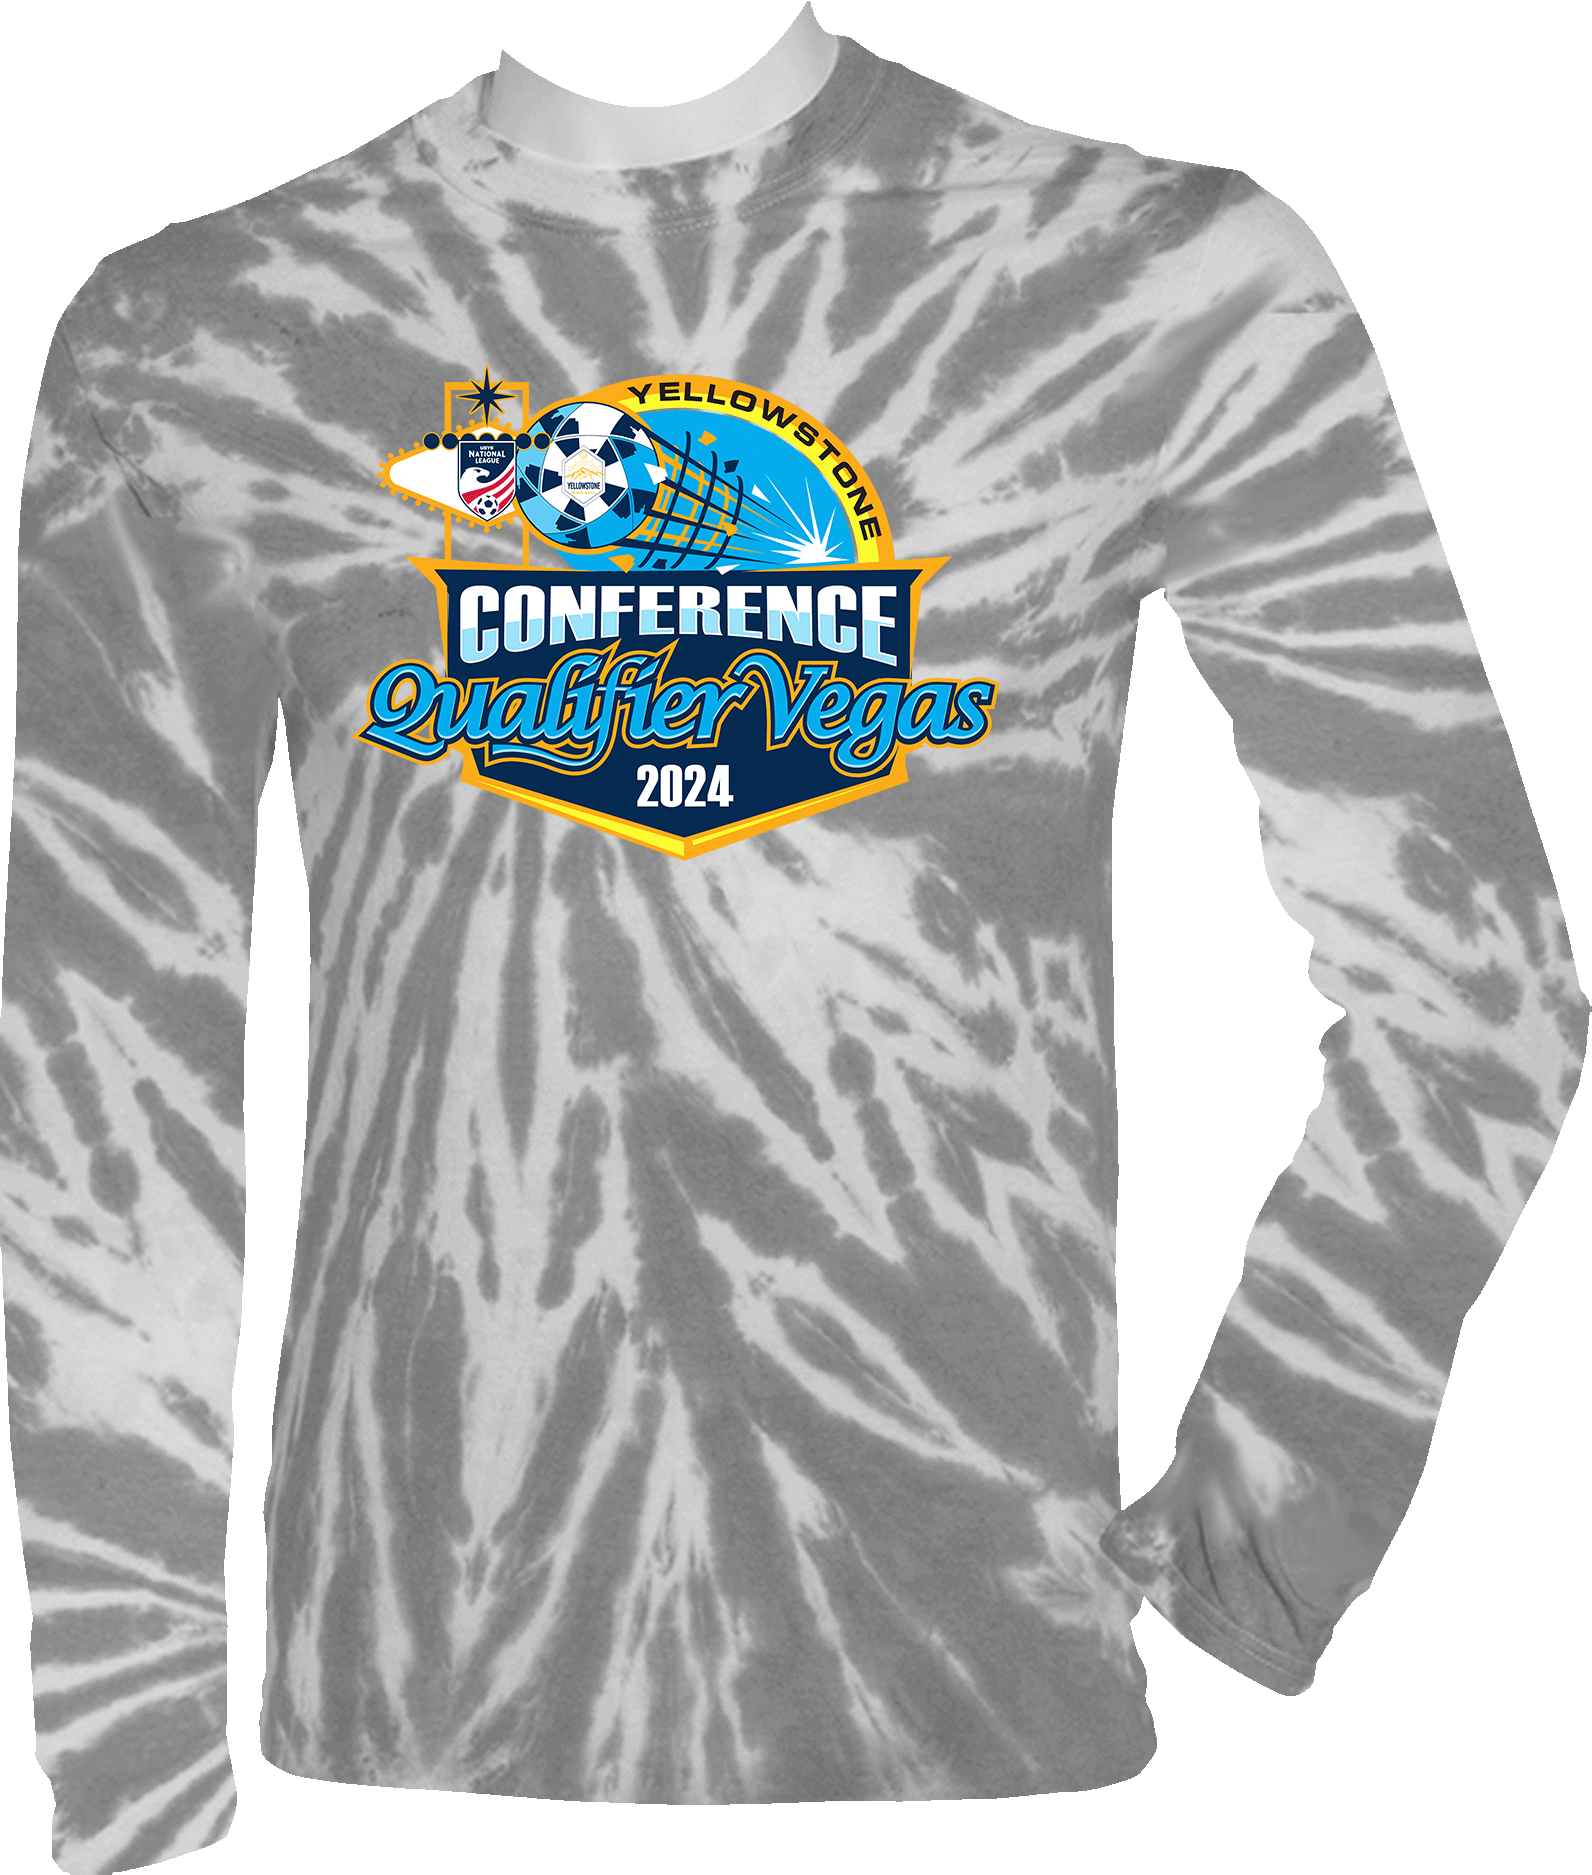 Tie-Dye Long Sleeves - 2024 Yellowstone Conference Qualifier Vegas